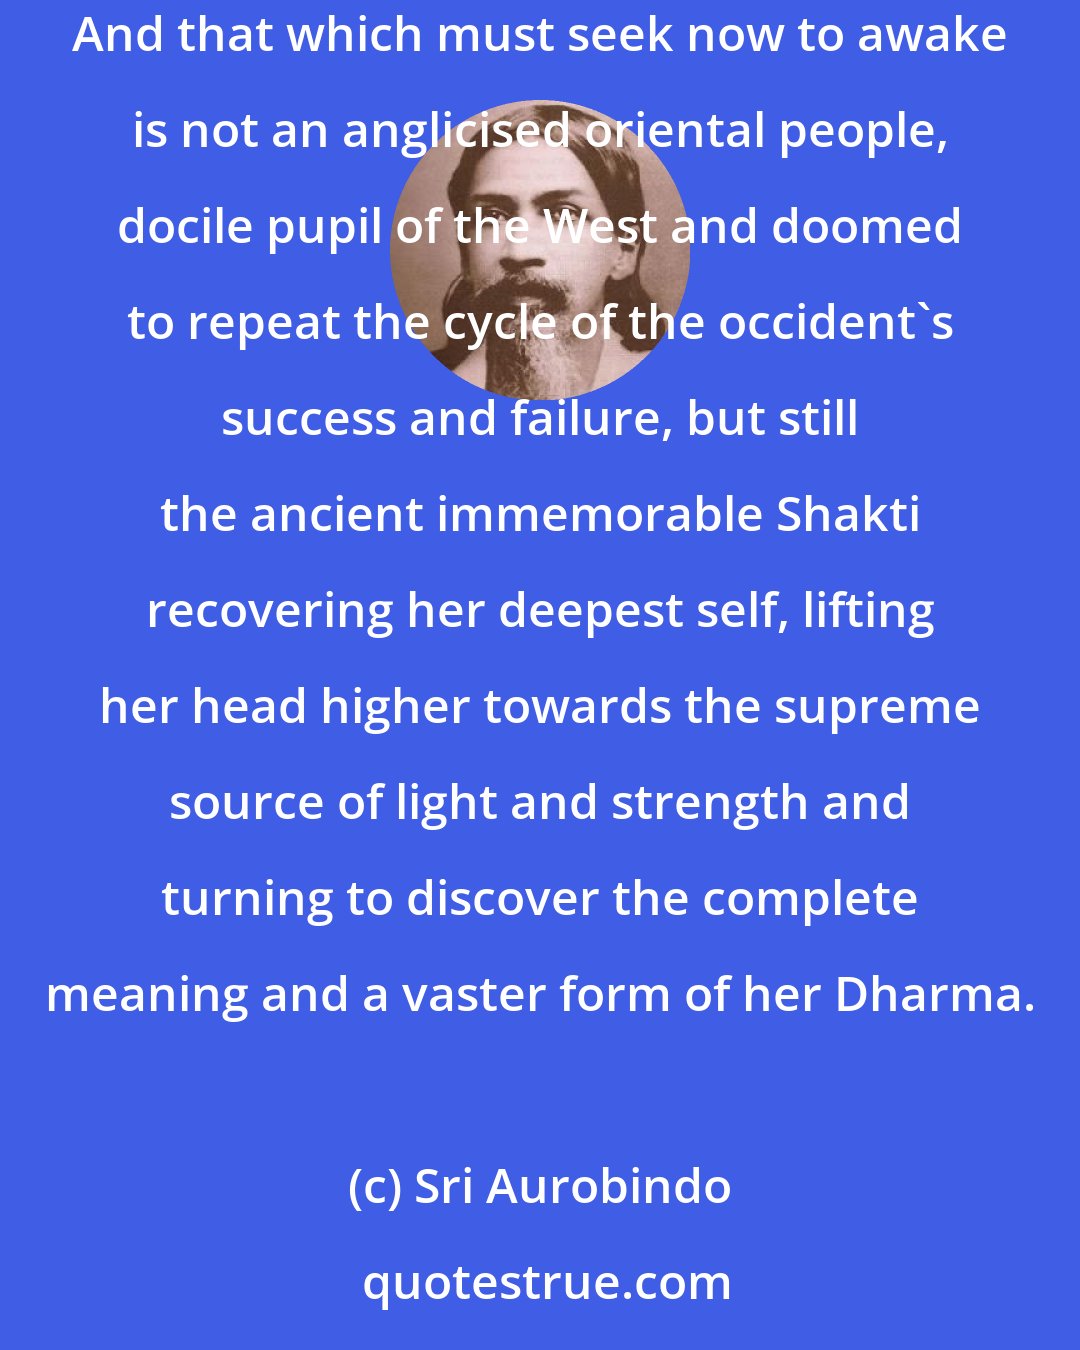 Sri Aurobindo: India of the ages is not dead nor has she spoken her last creative word; she lives and has still something to do for herself and the human peoples. And that which must seek now to awake is not an anglicised oriental people, docile pupil of the West and doomed to repeat the cycle of the occident's success and failure, but still the ancient immemorable Shakti recovering her deepest self, lifting her head higher towards the supreme source of light and strength and turning to discover the complete meaning and a vaster form of her Dharma.